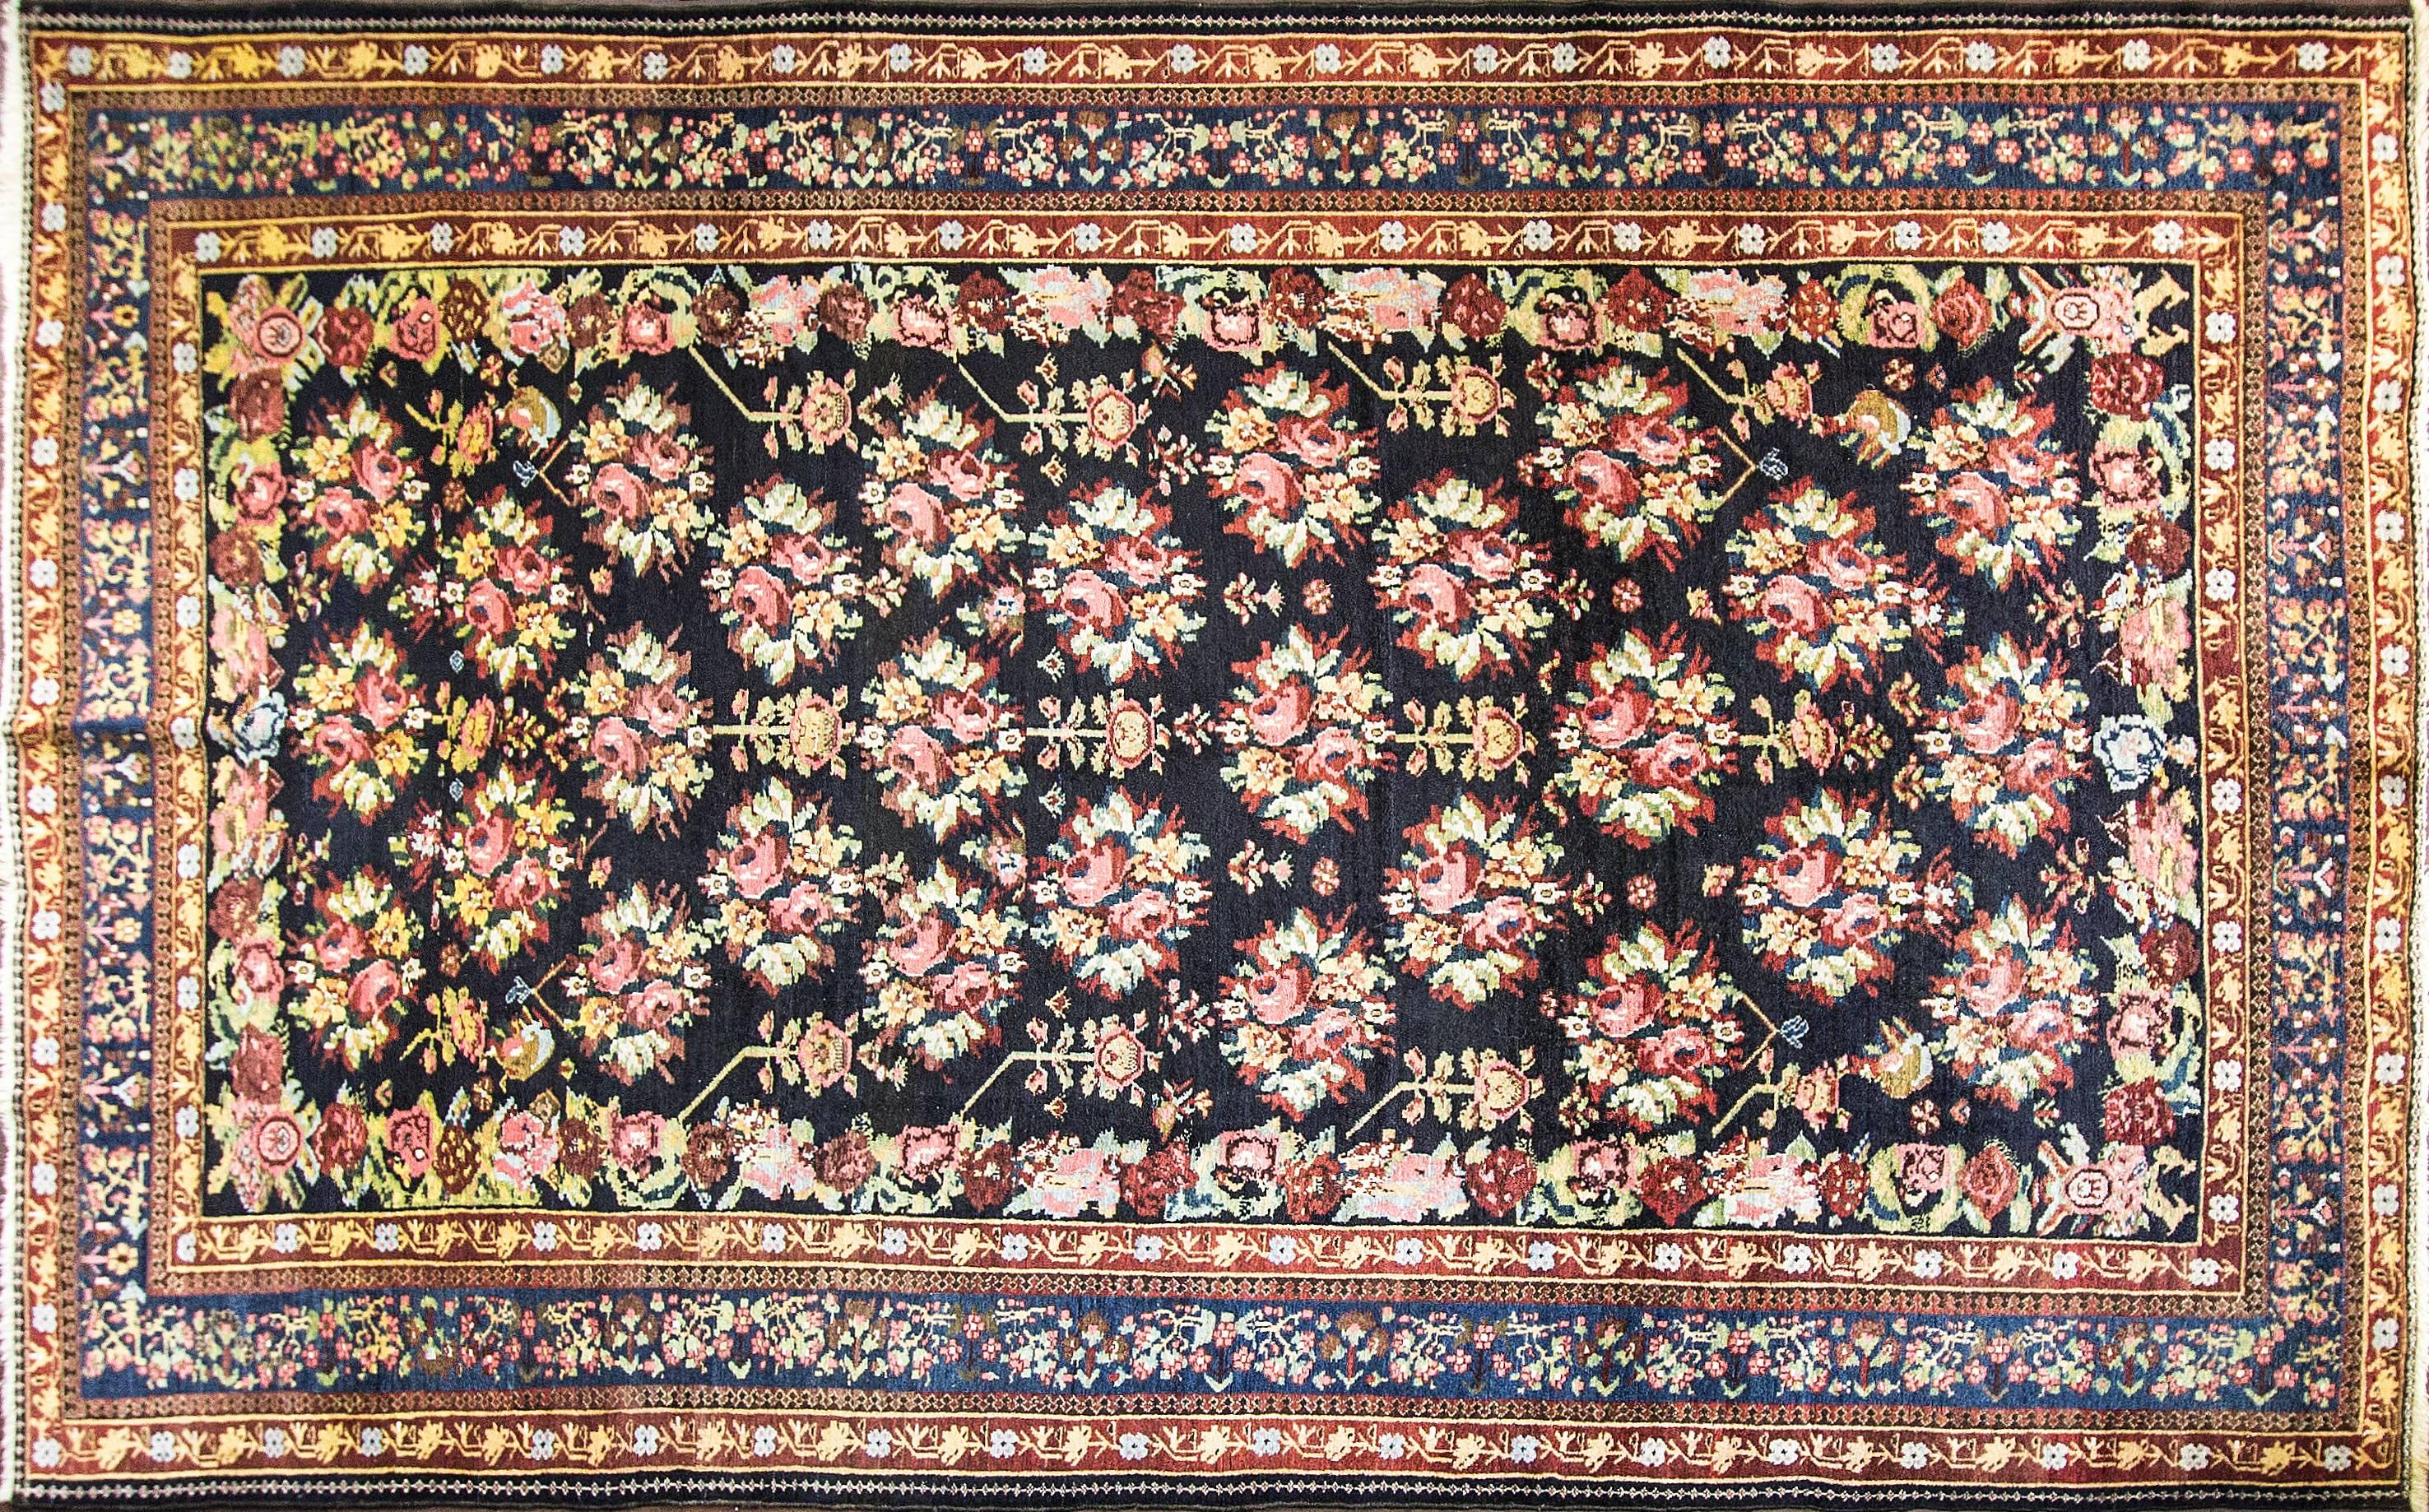 Bakhtiari rugs and carpets are one of the few types and styles of antique rugs that encompasses nomadic tribal as well as urban antique Persian rug design. Many Persian Bakhtiari rugs are in fact tribal pieces that rely upon a repertoire of abstract